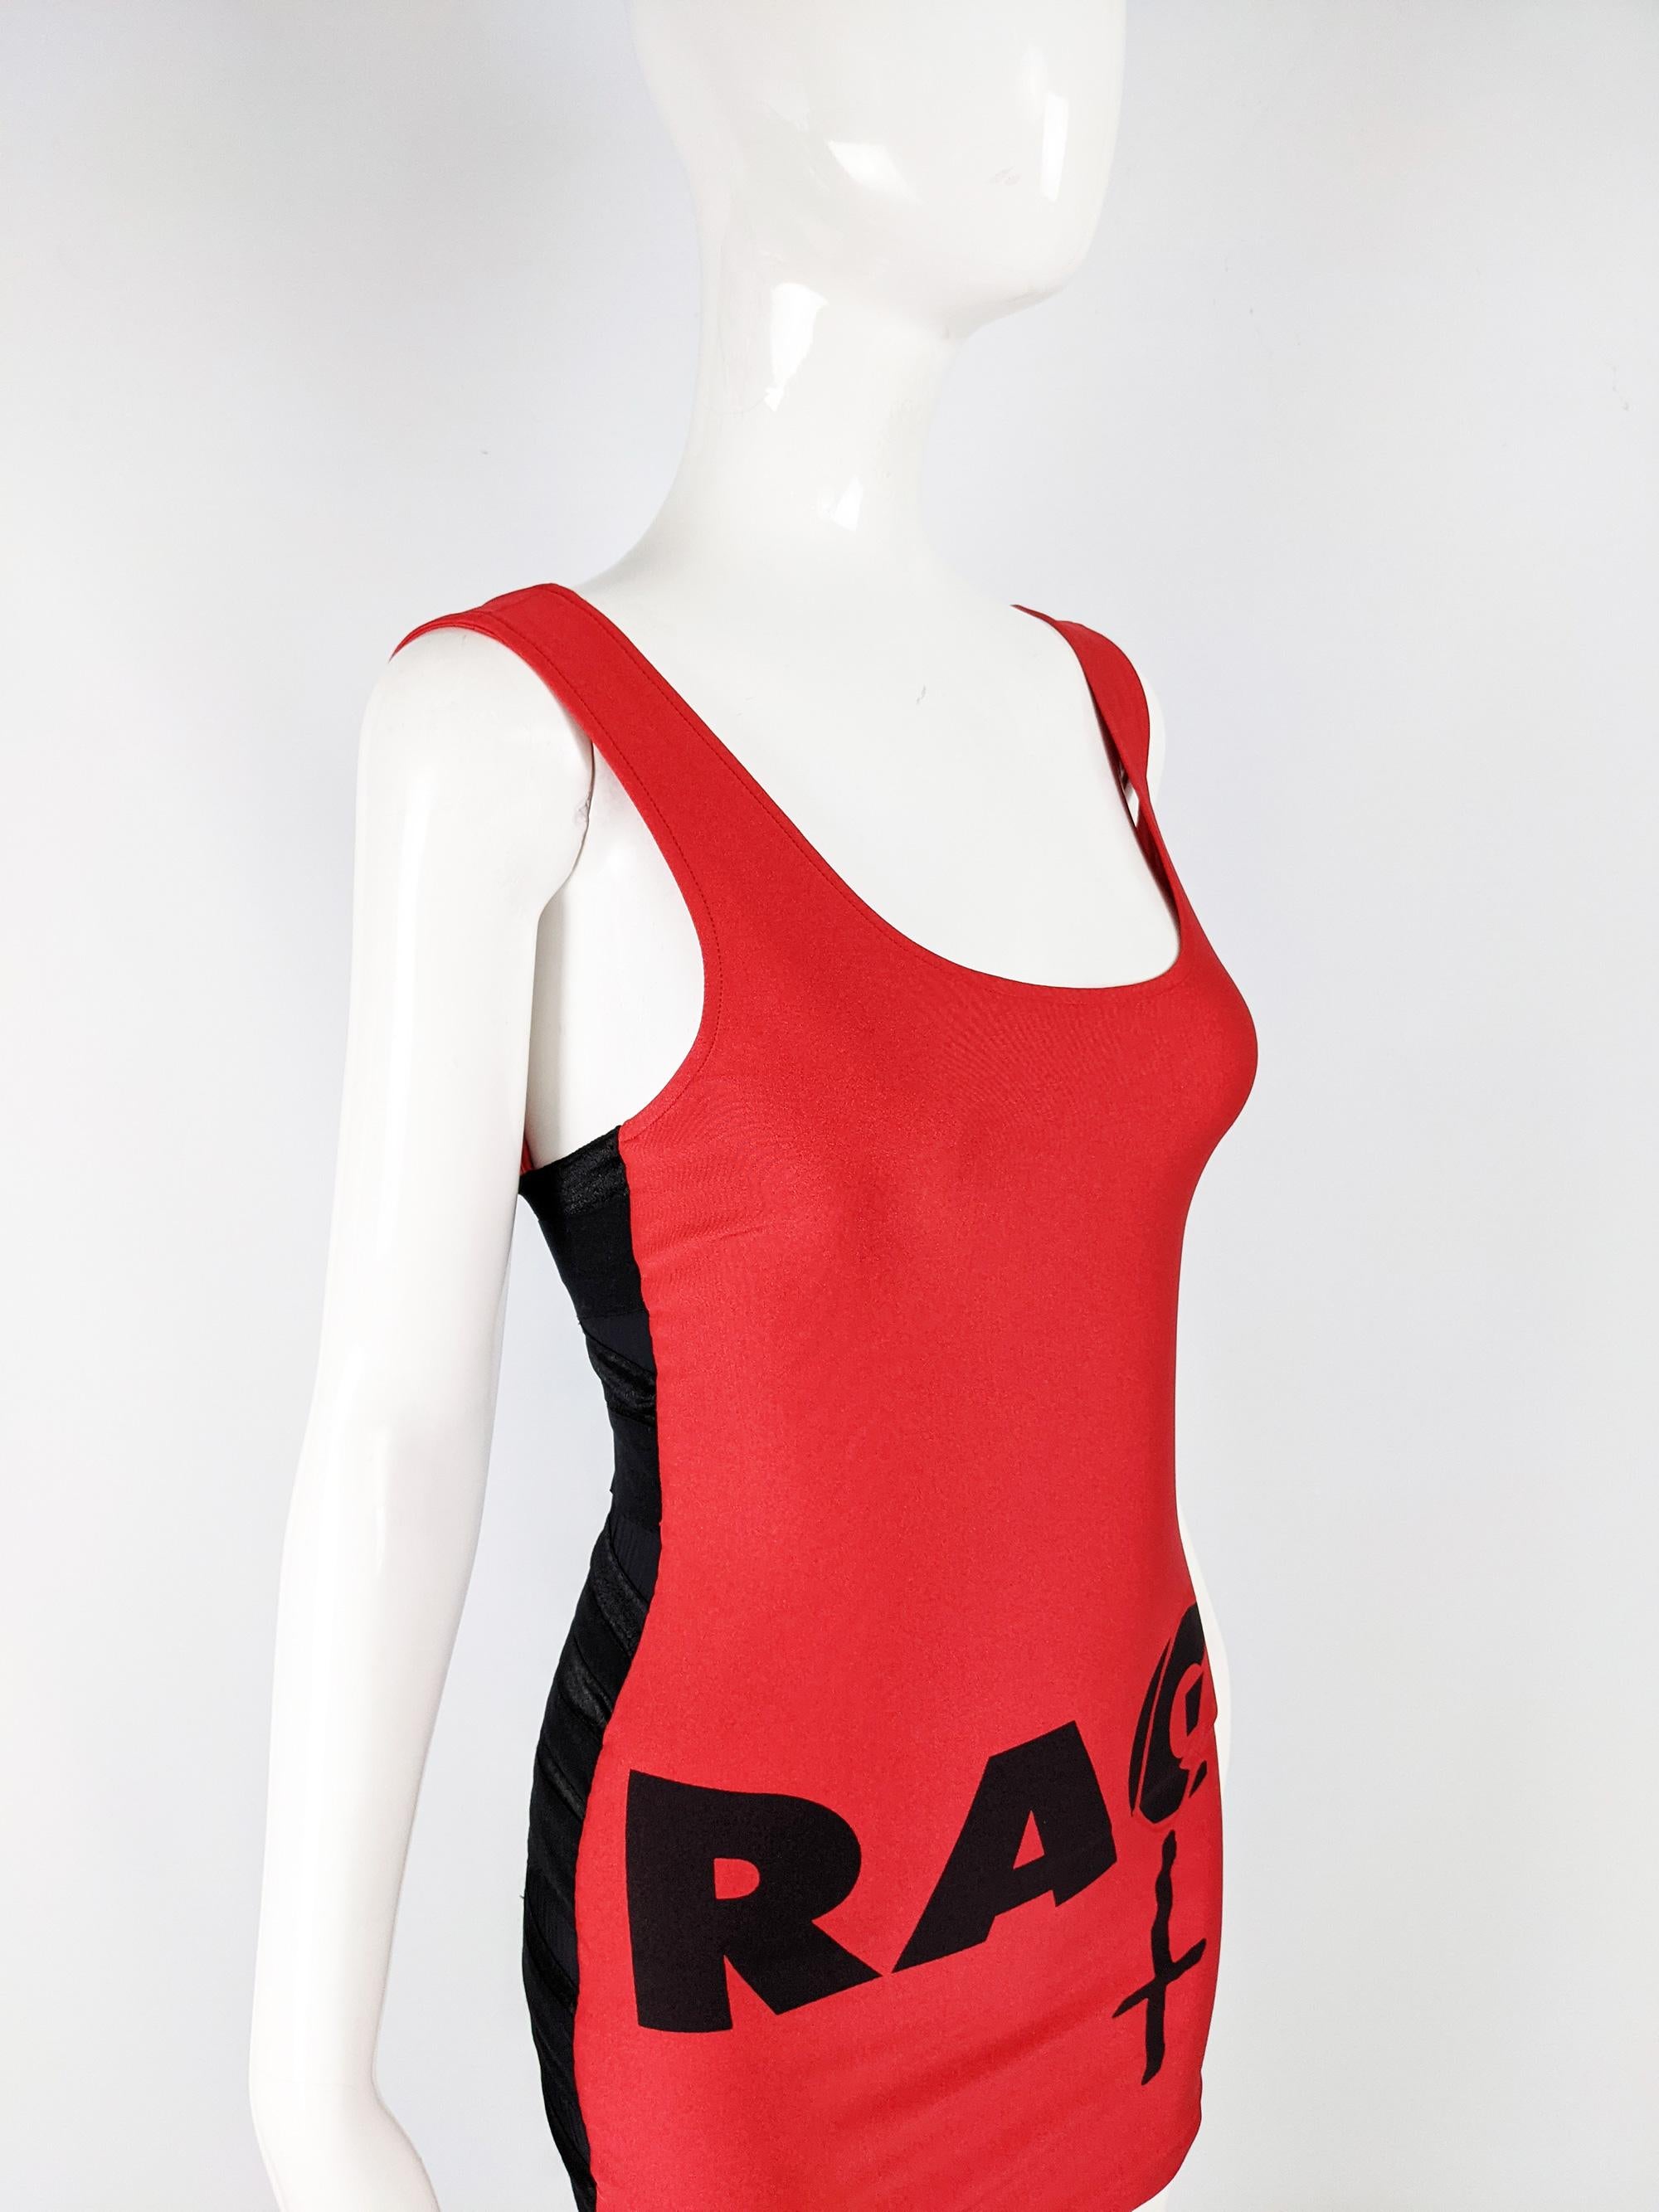 Helen Storey Vintage Red & Black Mini Bodycon Party Dress In Good Condition For Sale In Doncaster, South Yorkshire